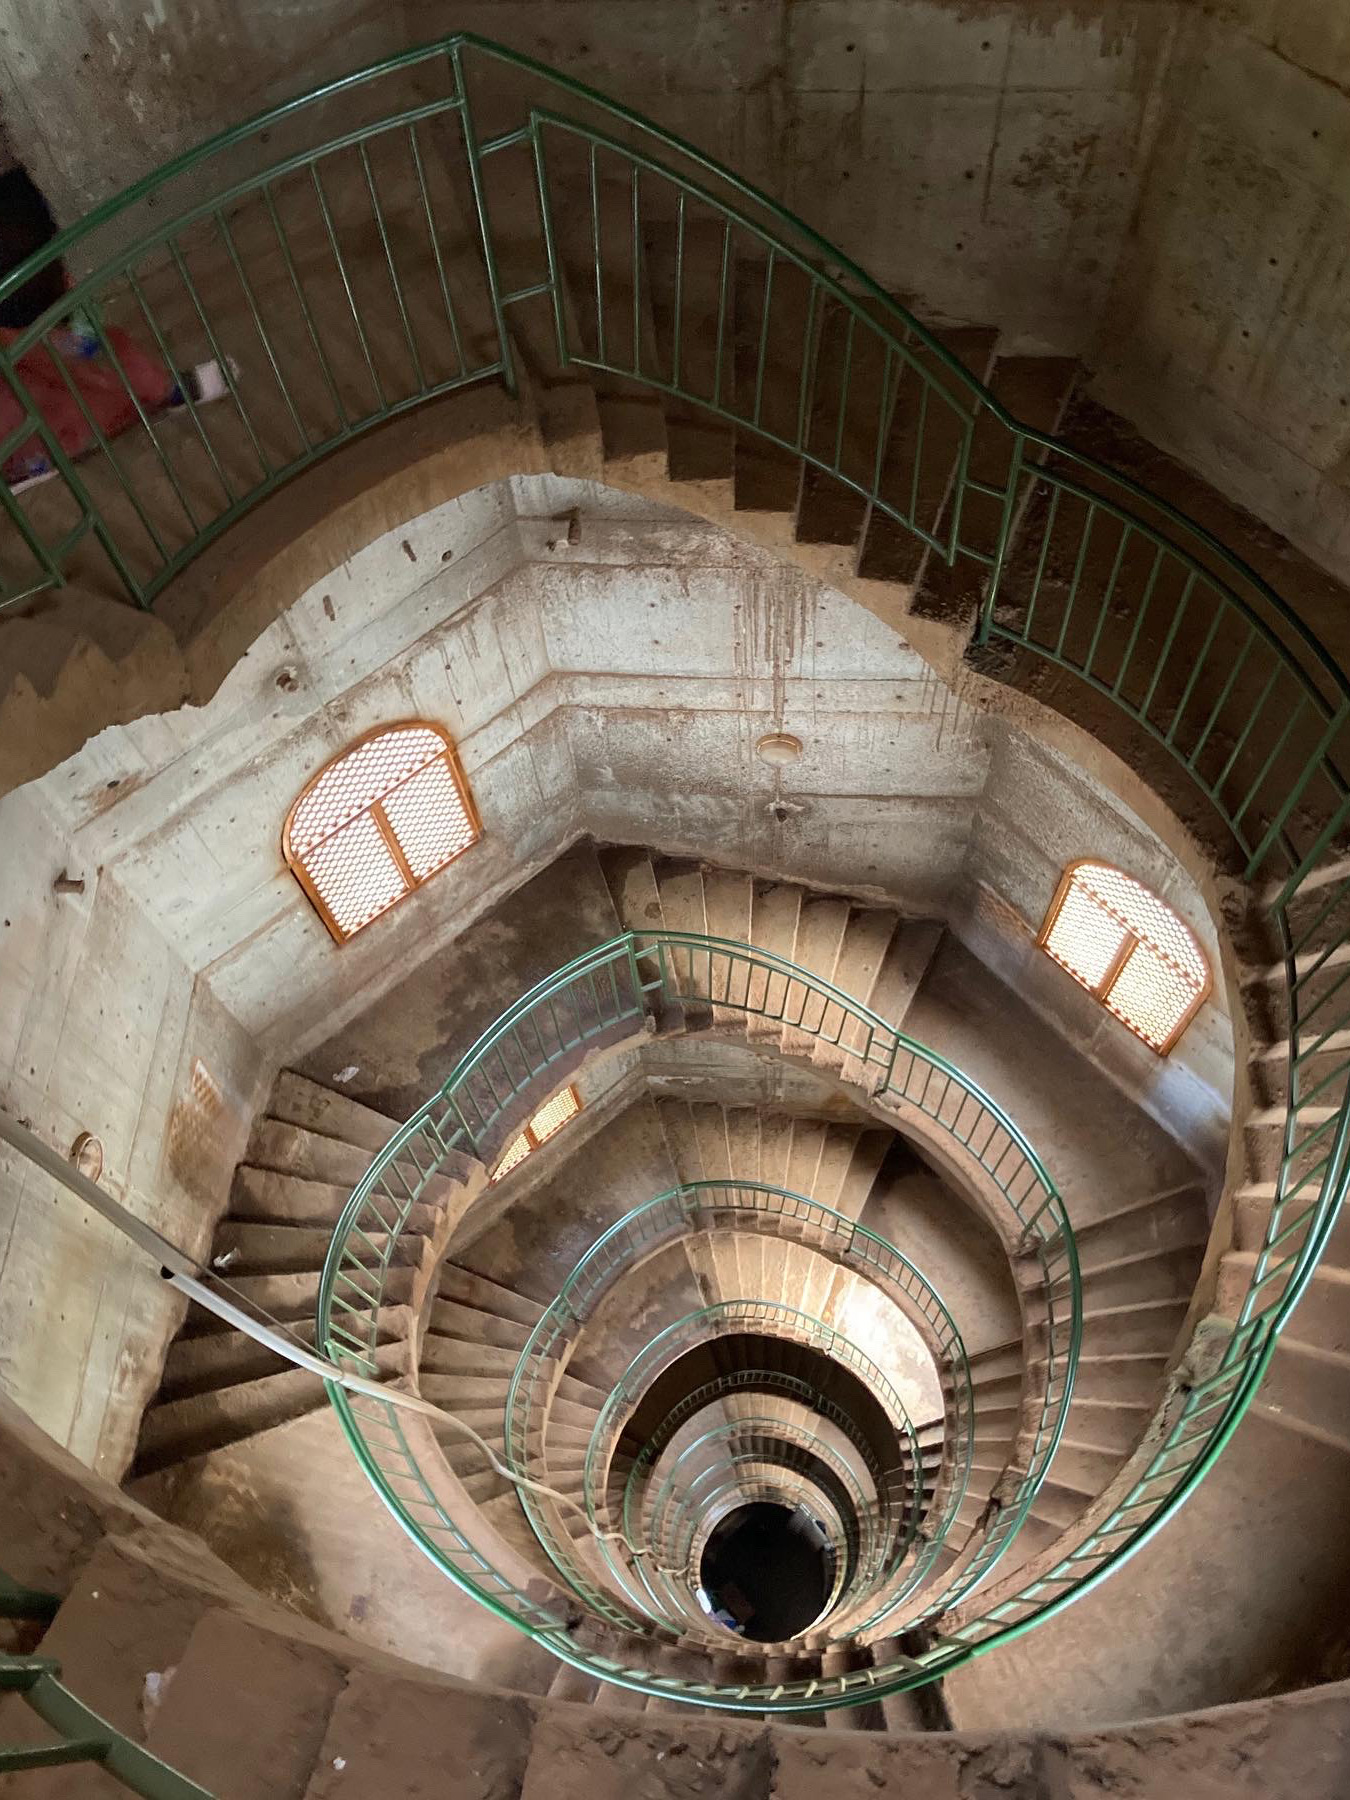 Image of Spiral staircase in Gaddafi